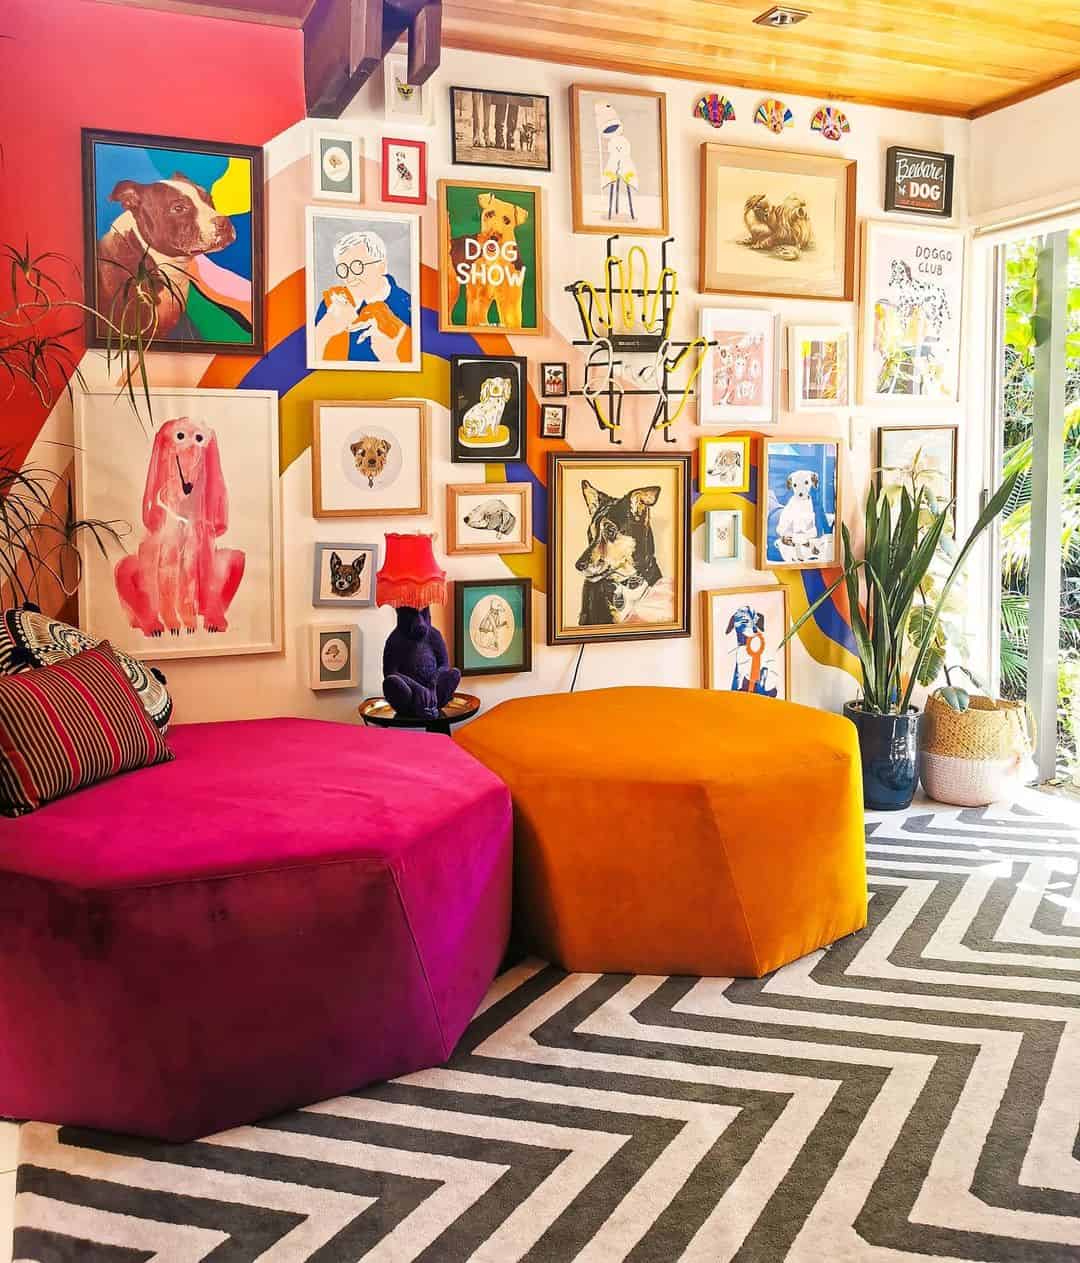 Charming Home Interior In Eclectic Style by Evie Kemp